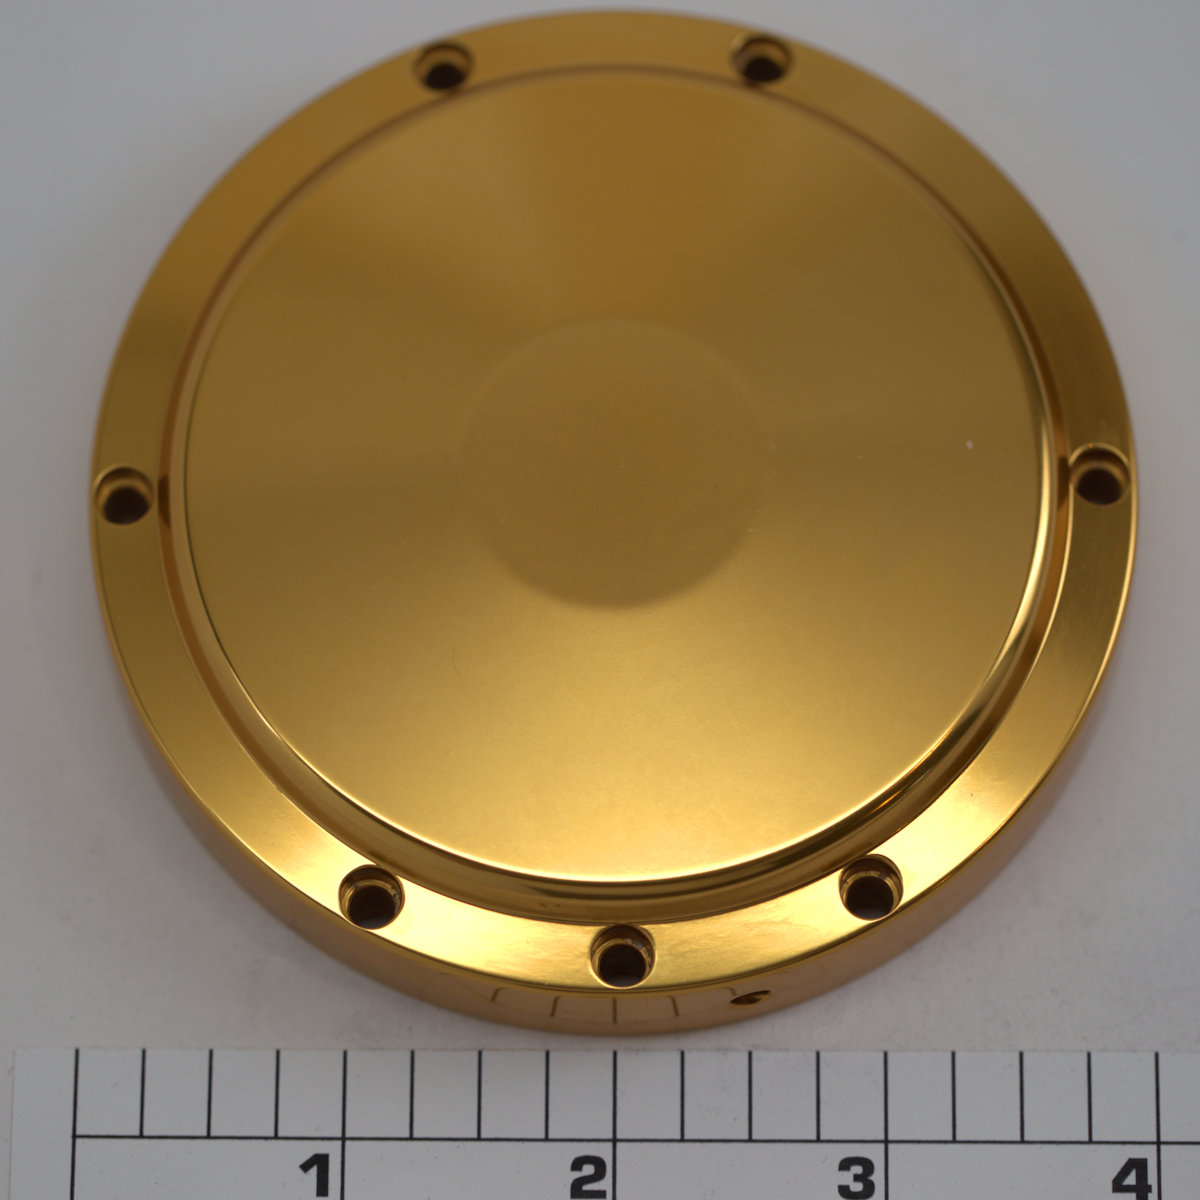 27-30 Plate, Non-Handle Side Plate